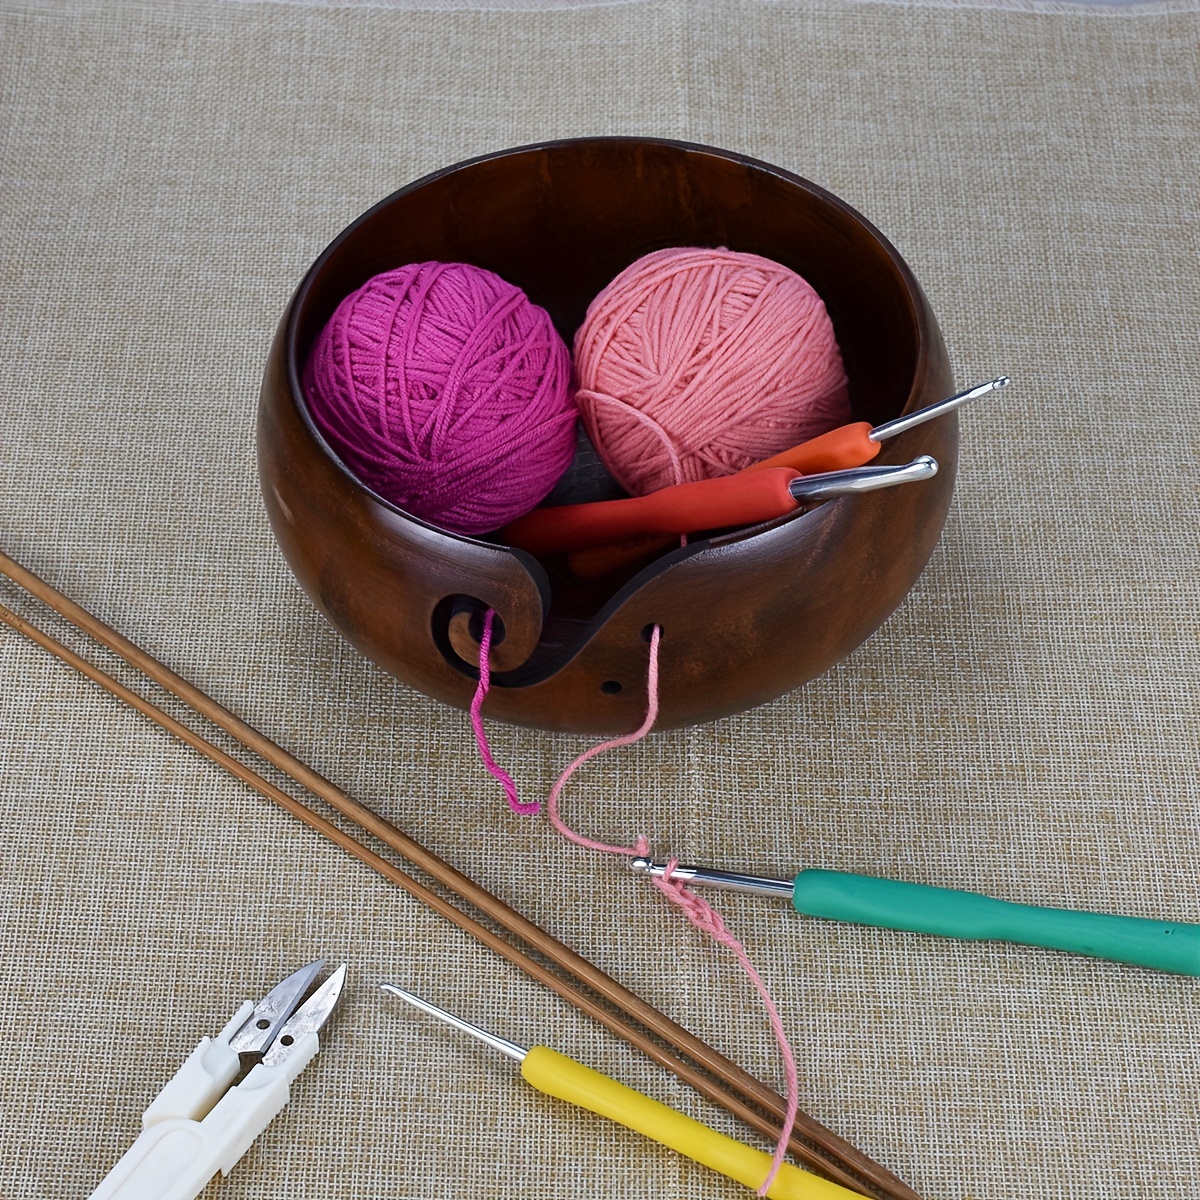  Wooden Yarn Bowl Round Crochet Bowl Holder with Holes Pine  Knitting Yarn Bowls Wooden Weaving Thread Bowl with Lid Portable Yarn  Storage Bowl for DIY Knitting Crafts 5.9x5.9x3inch(Dark with lid)